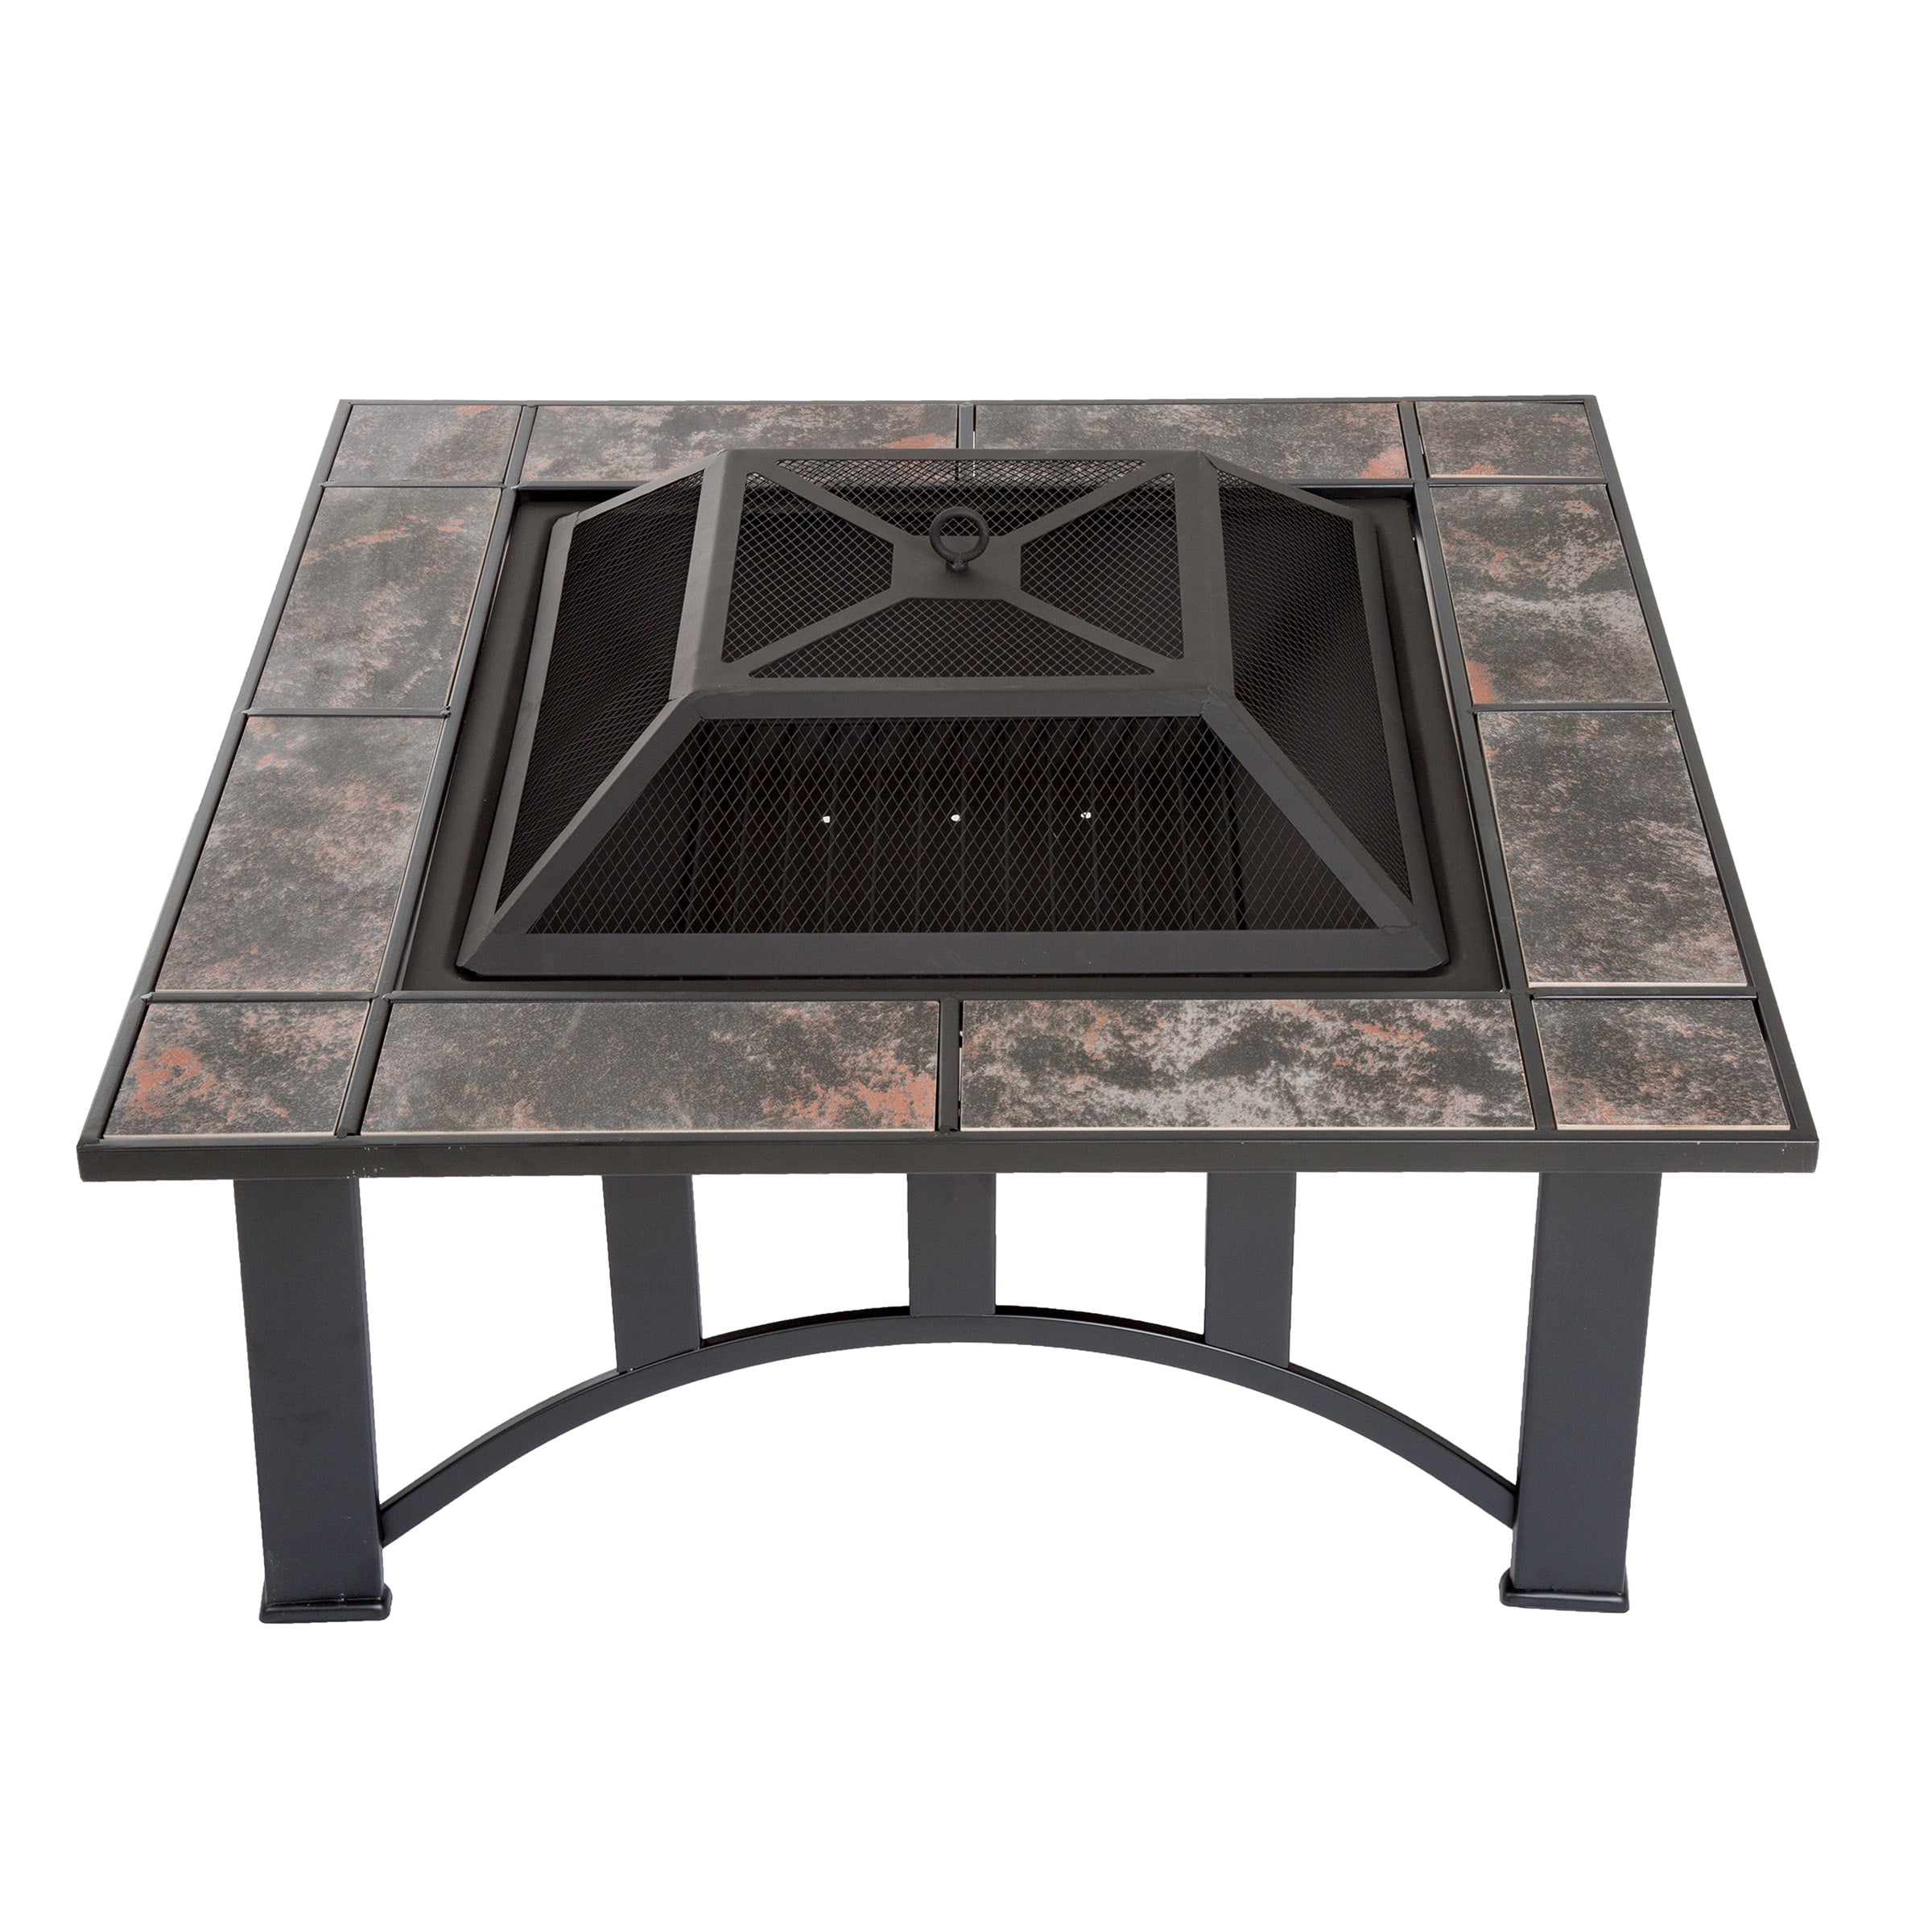 Fire Pit Table 33 Inch Square Wood Burning Bonfire Pit With Marble Tile Edge Spark Screen Cover And Log Poker For Backyard Or Patio By Pure Garden Walmart Com